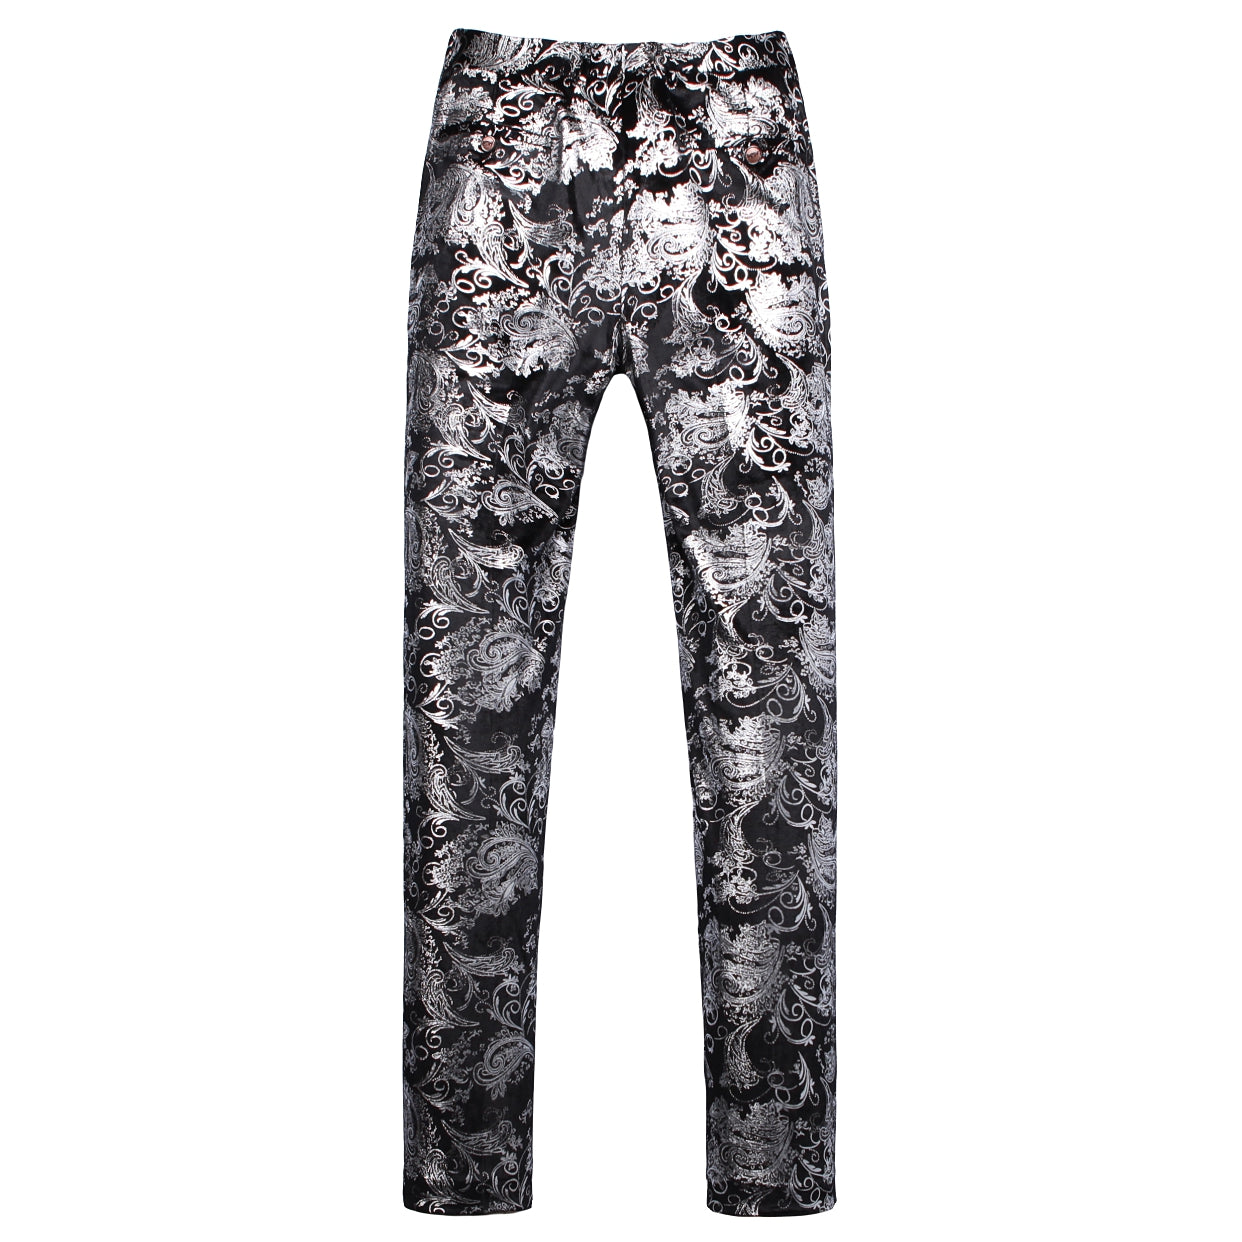 Mens Slim Fit Gold Printed Flat Front Pants Stylish Casual Floral Patten Trousers